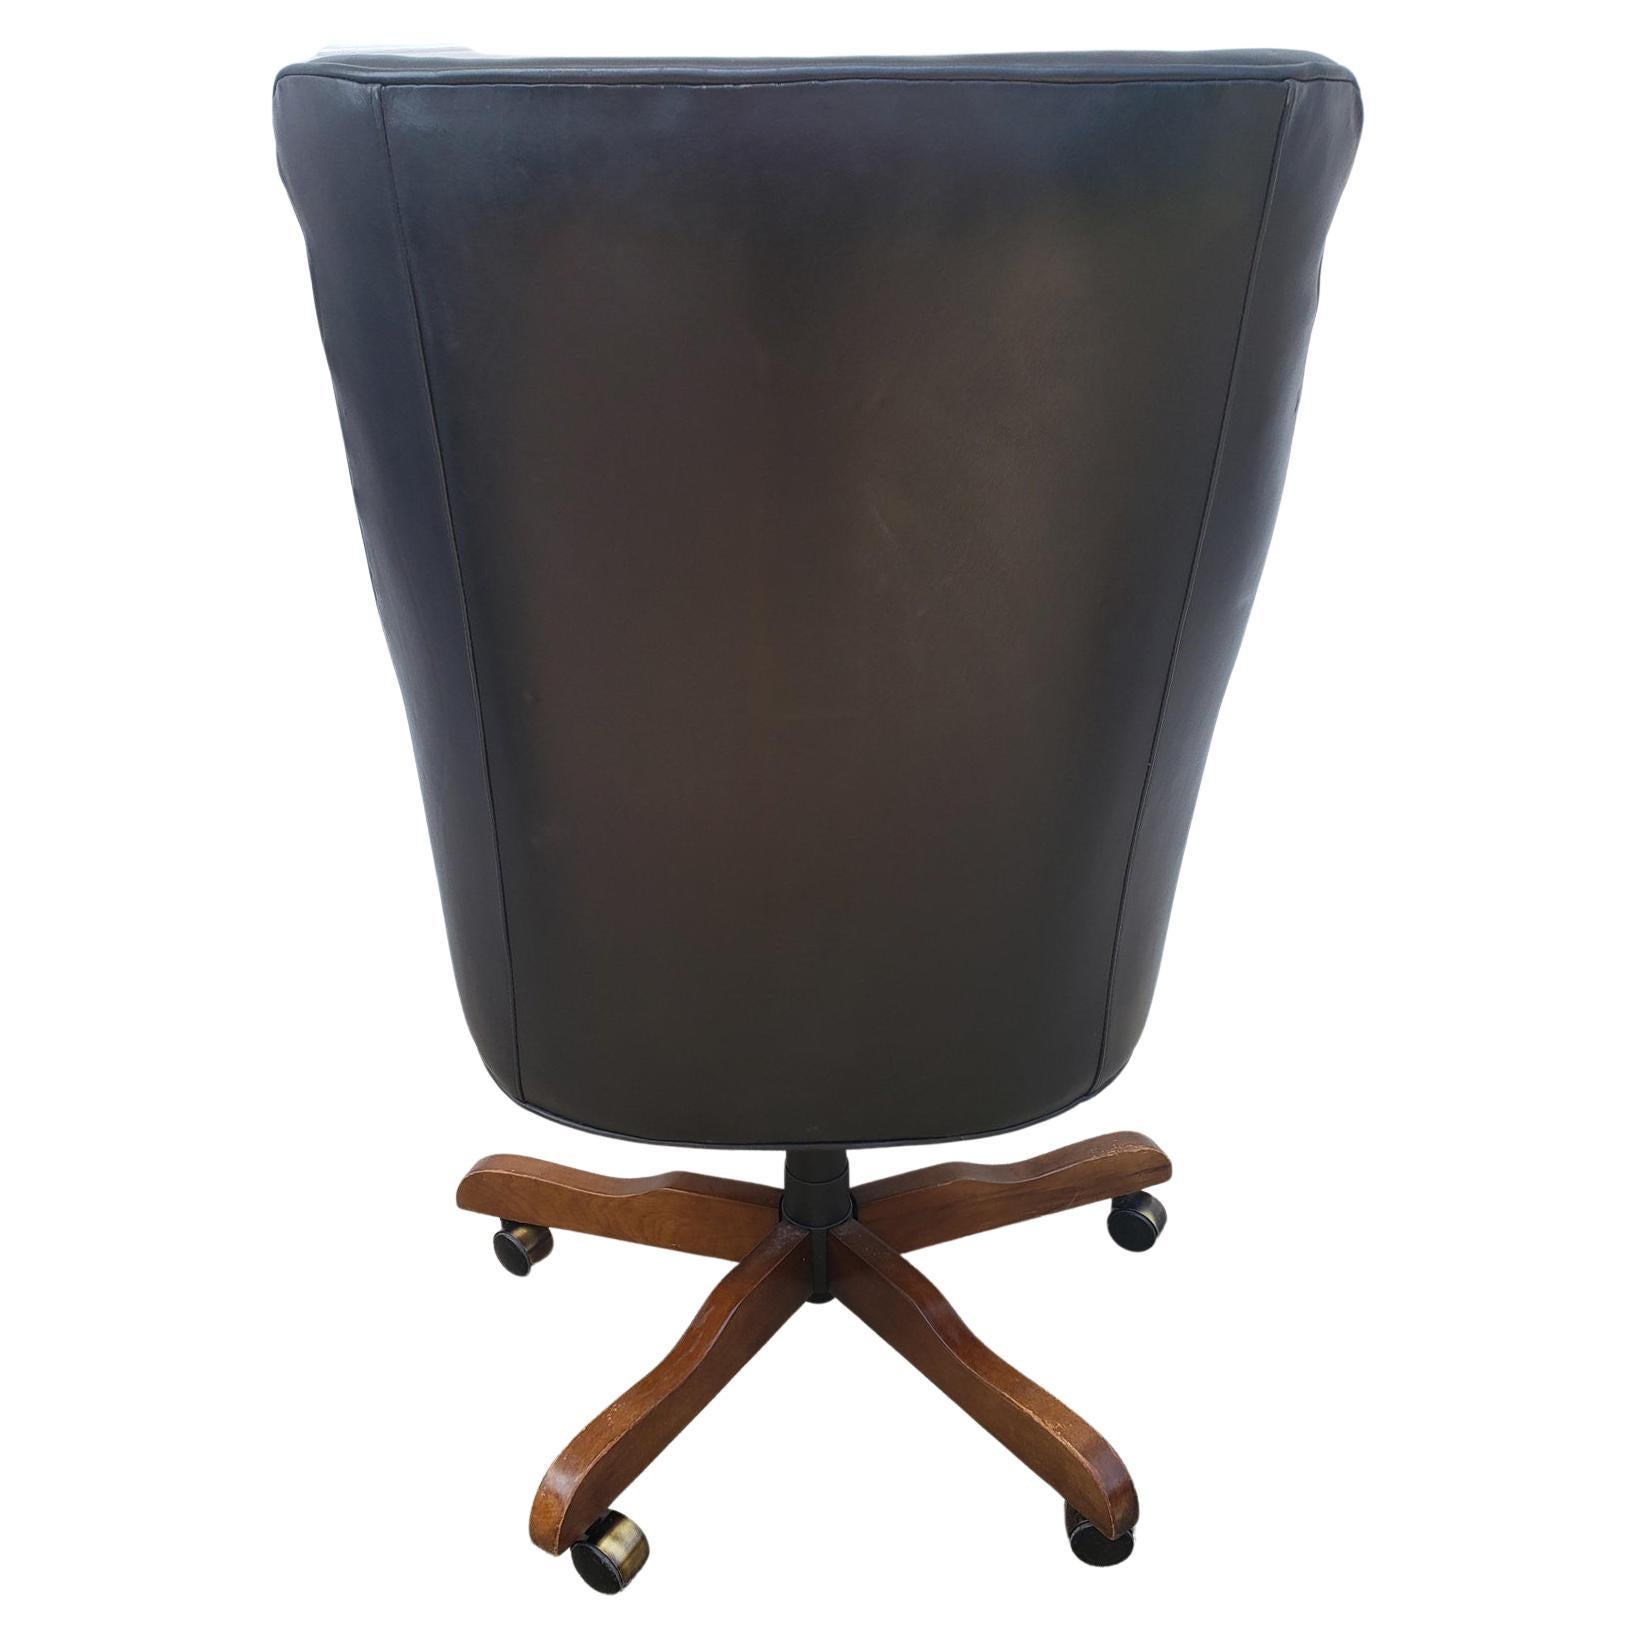 American Classical Vintage Century Furniture Co. Swivel Executive Office Chair on Casters